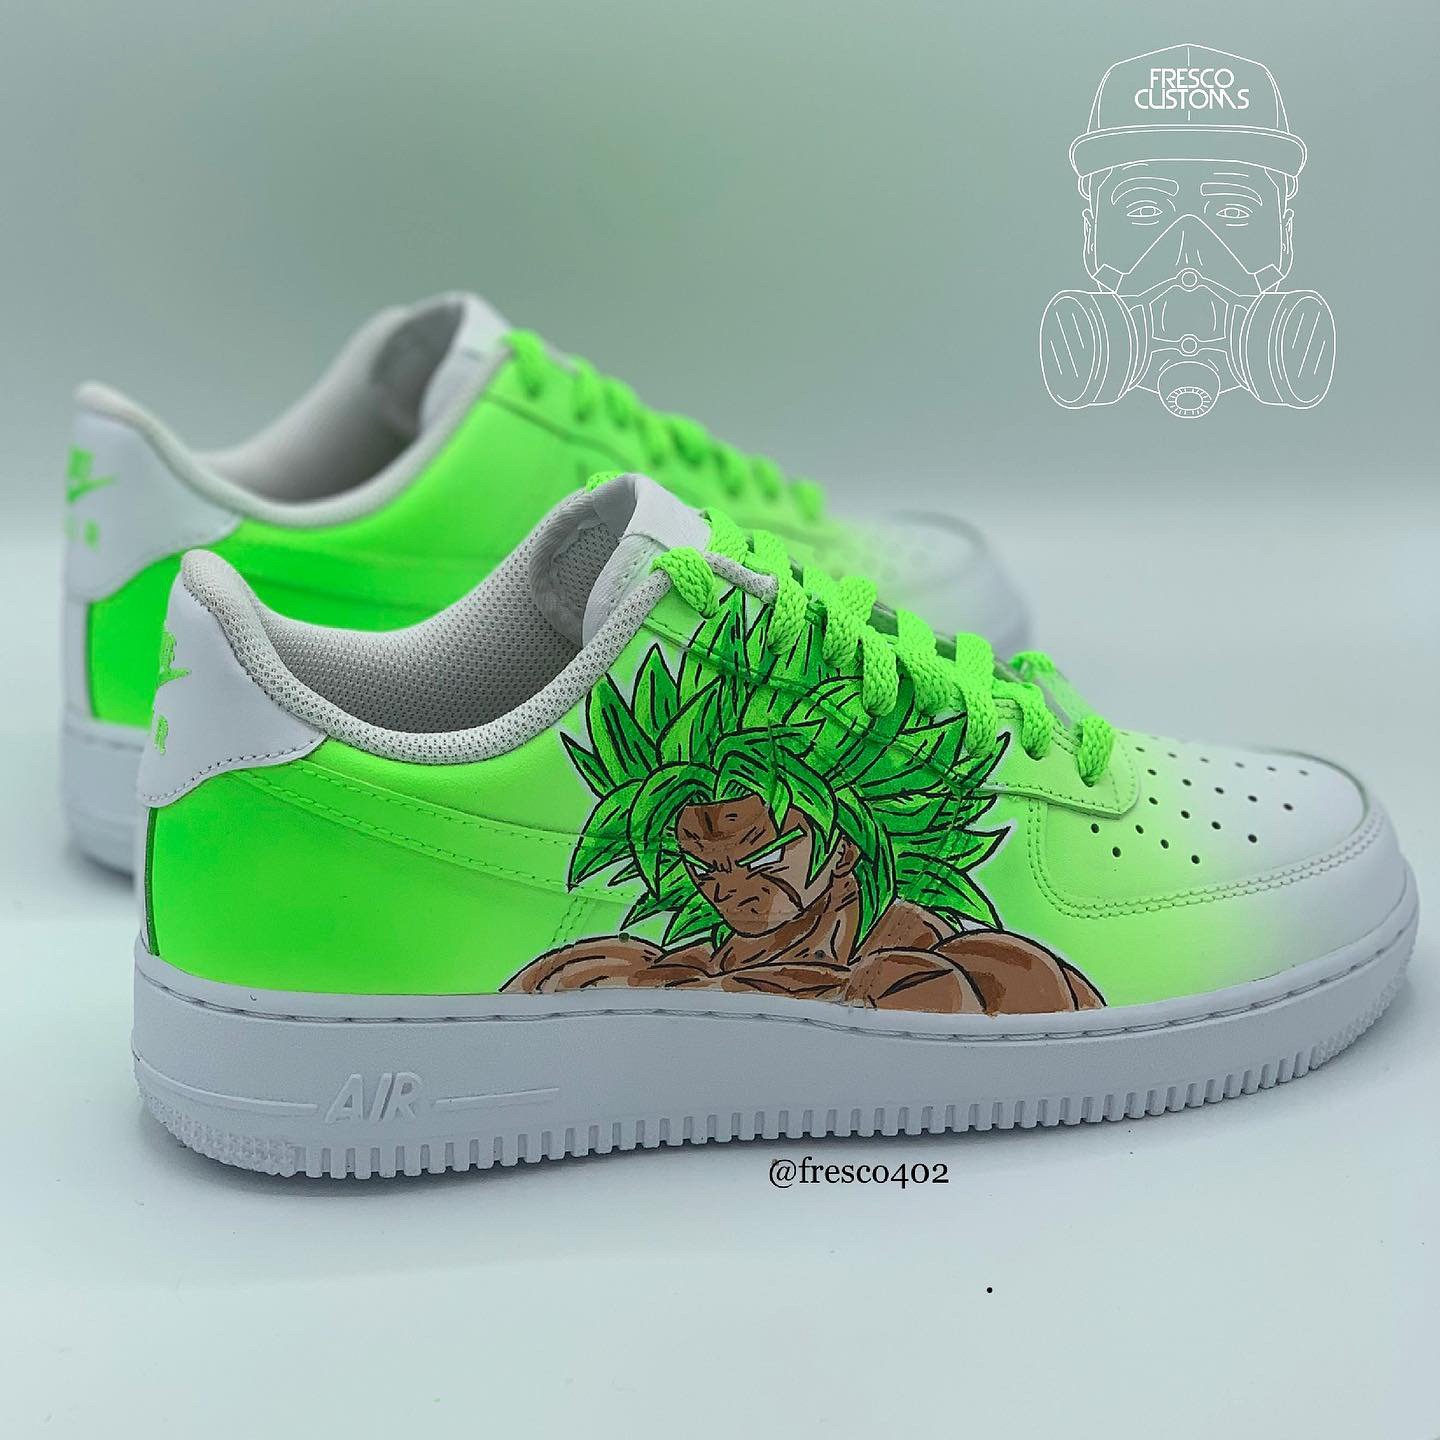 broly shoes